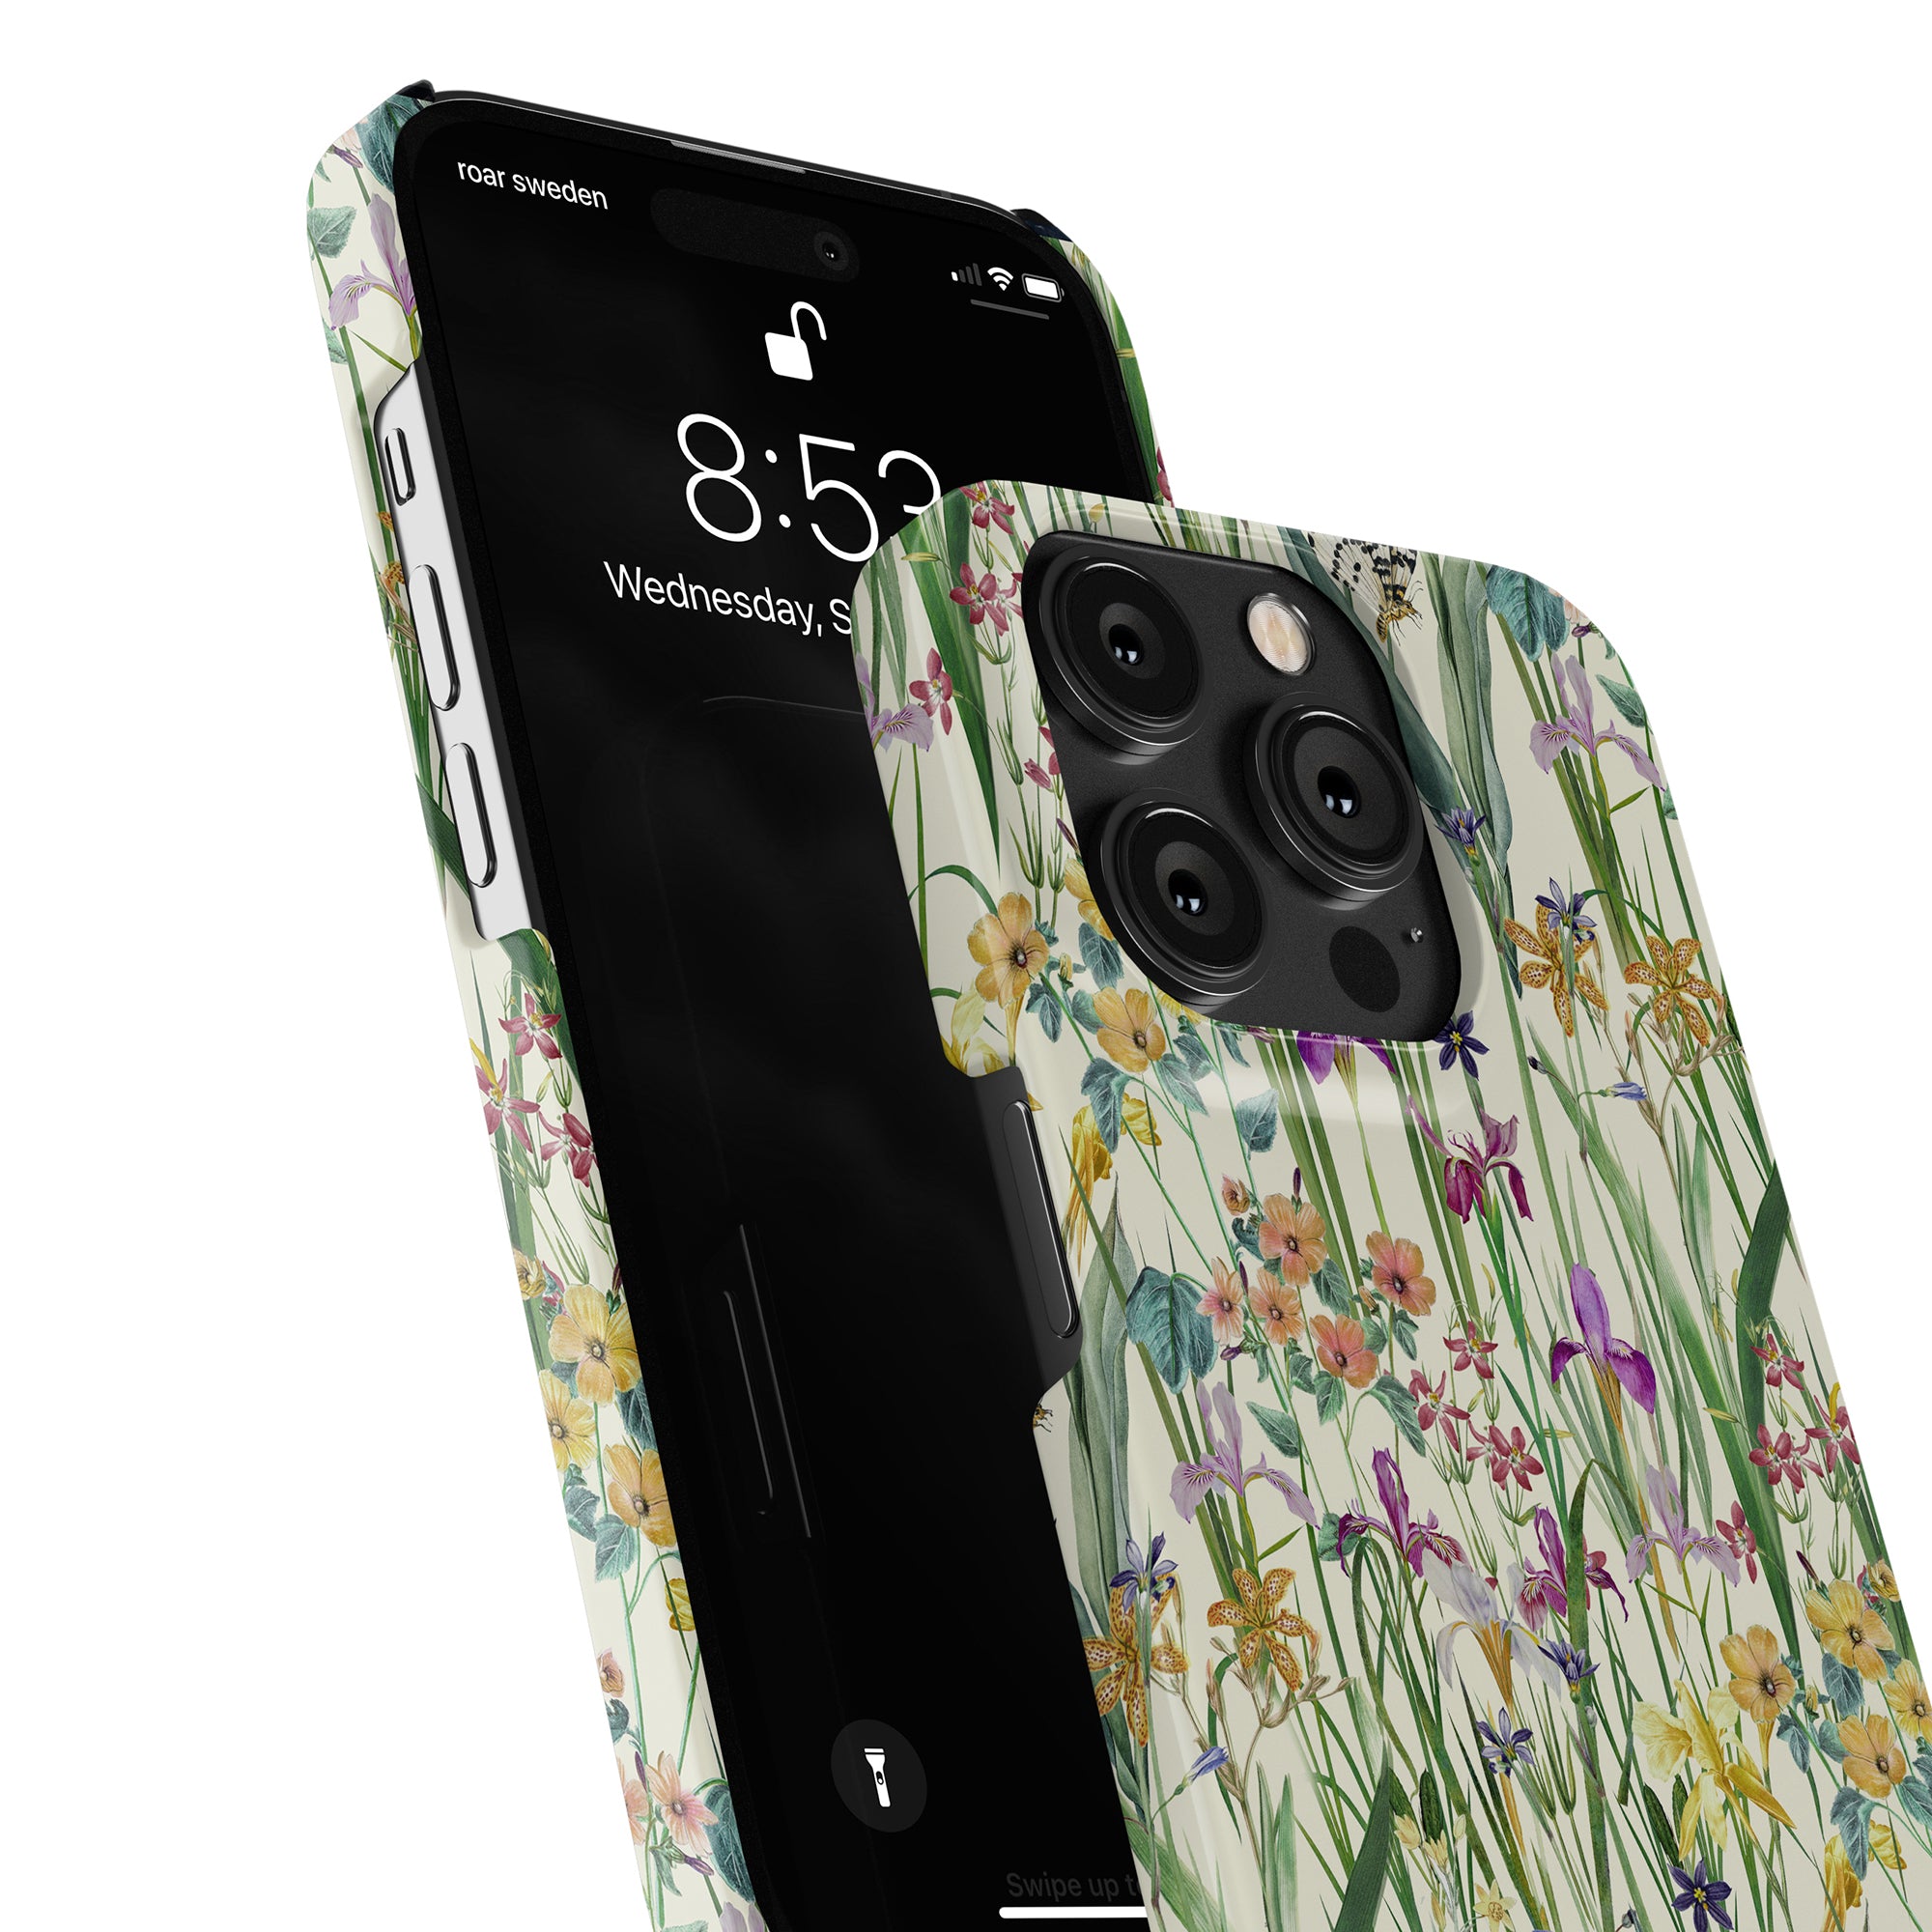 Sentence with product name: Black smartphone with a Blooming Meadow - Slim case displayed on a plain background, alongside an anti-aging moisturizer.